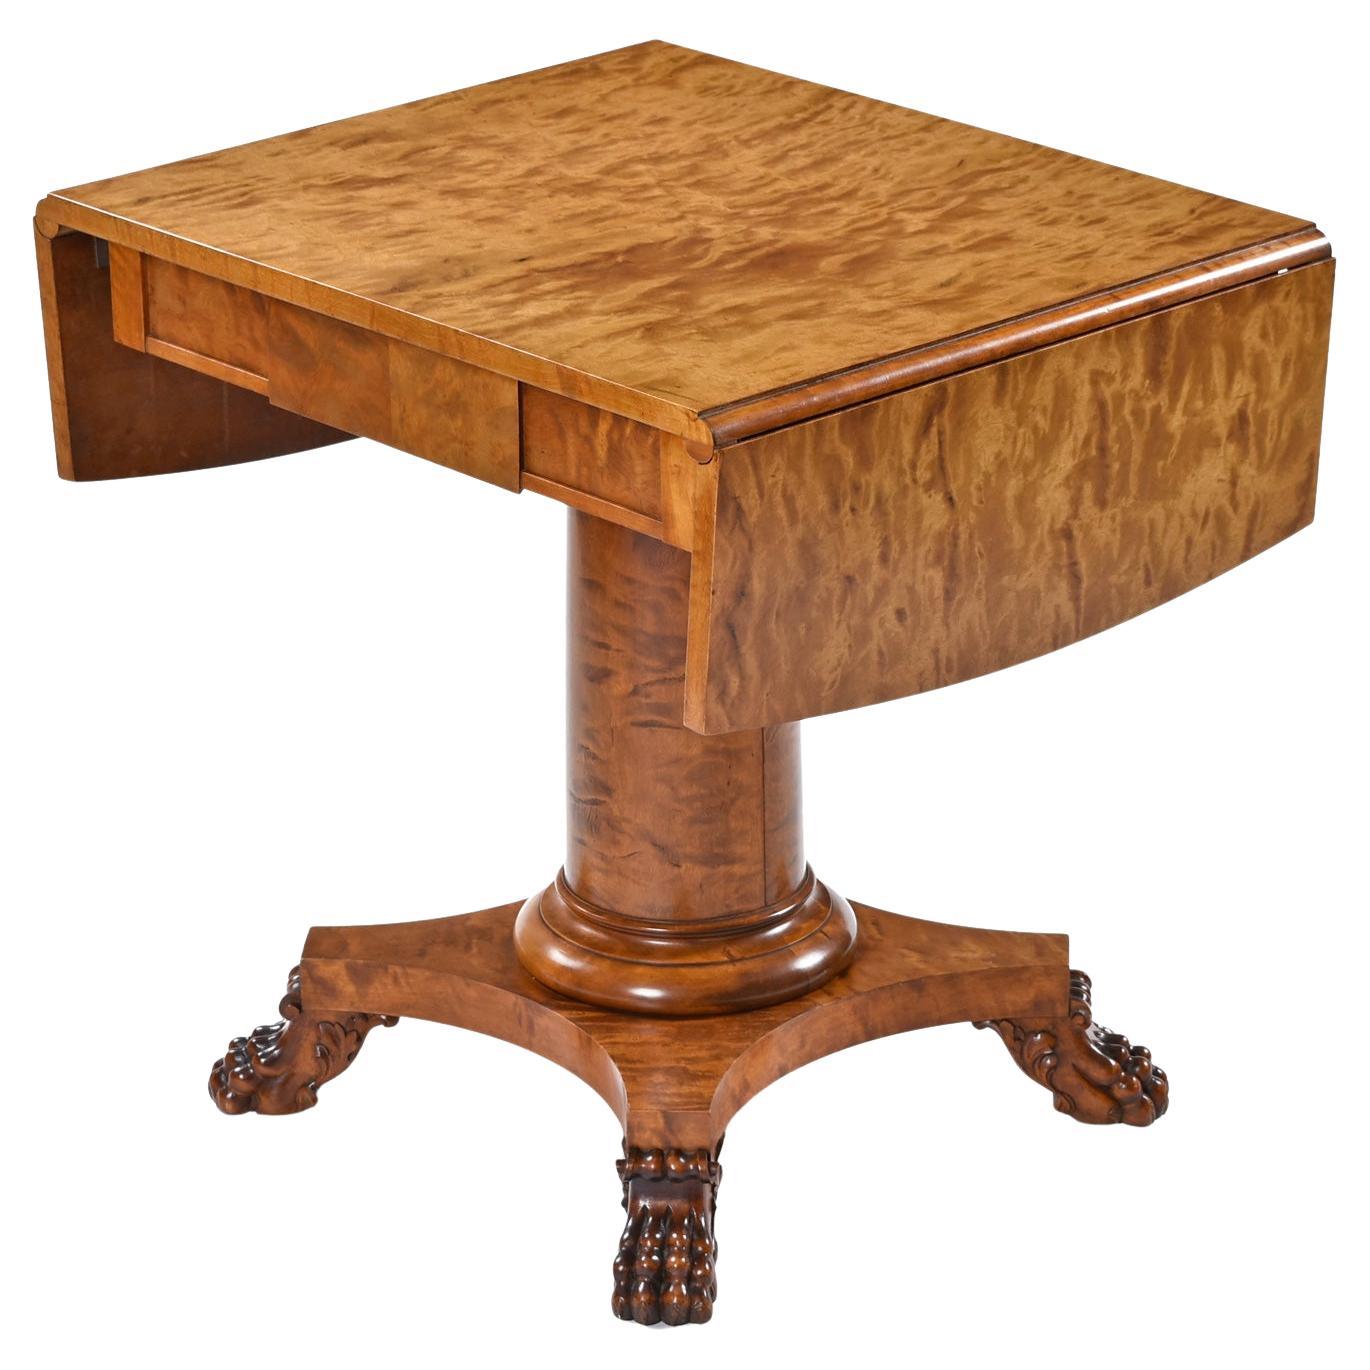 The possibilities are endless for this Swedish made Bierdermeier drop-leaf table. Perfect for a writing desk, dry bar, center table, sofa table, entryway table, console table, or tea table just to name a few. 

The honey colored birch is almost